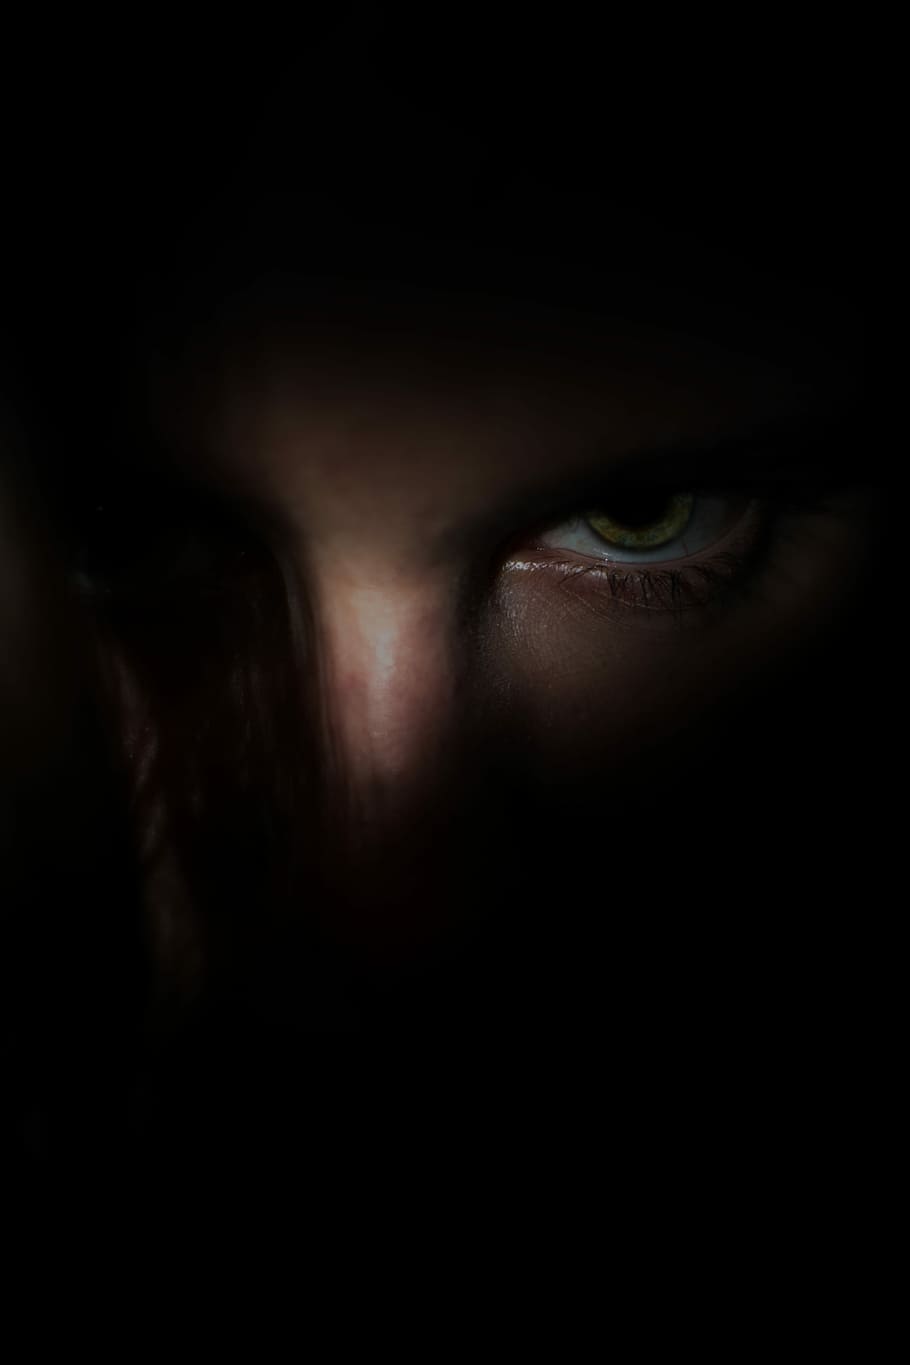 person face, untitled, eye, shadow, dark, mad, scary, angry, night